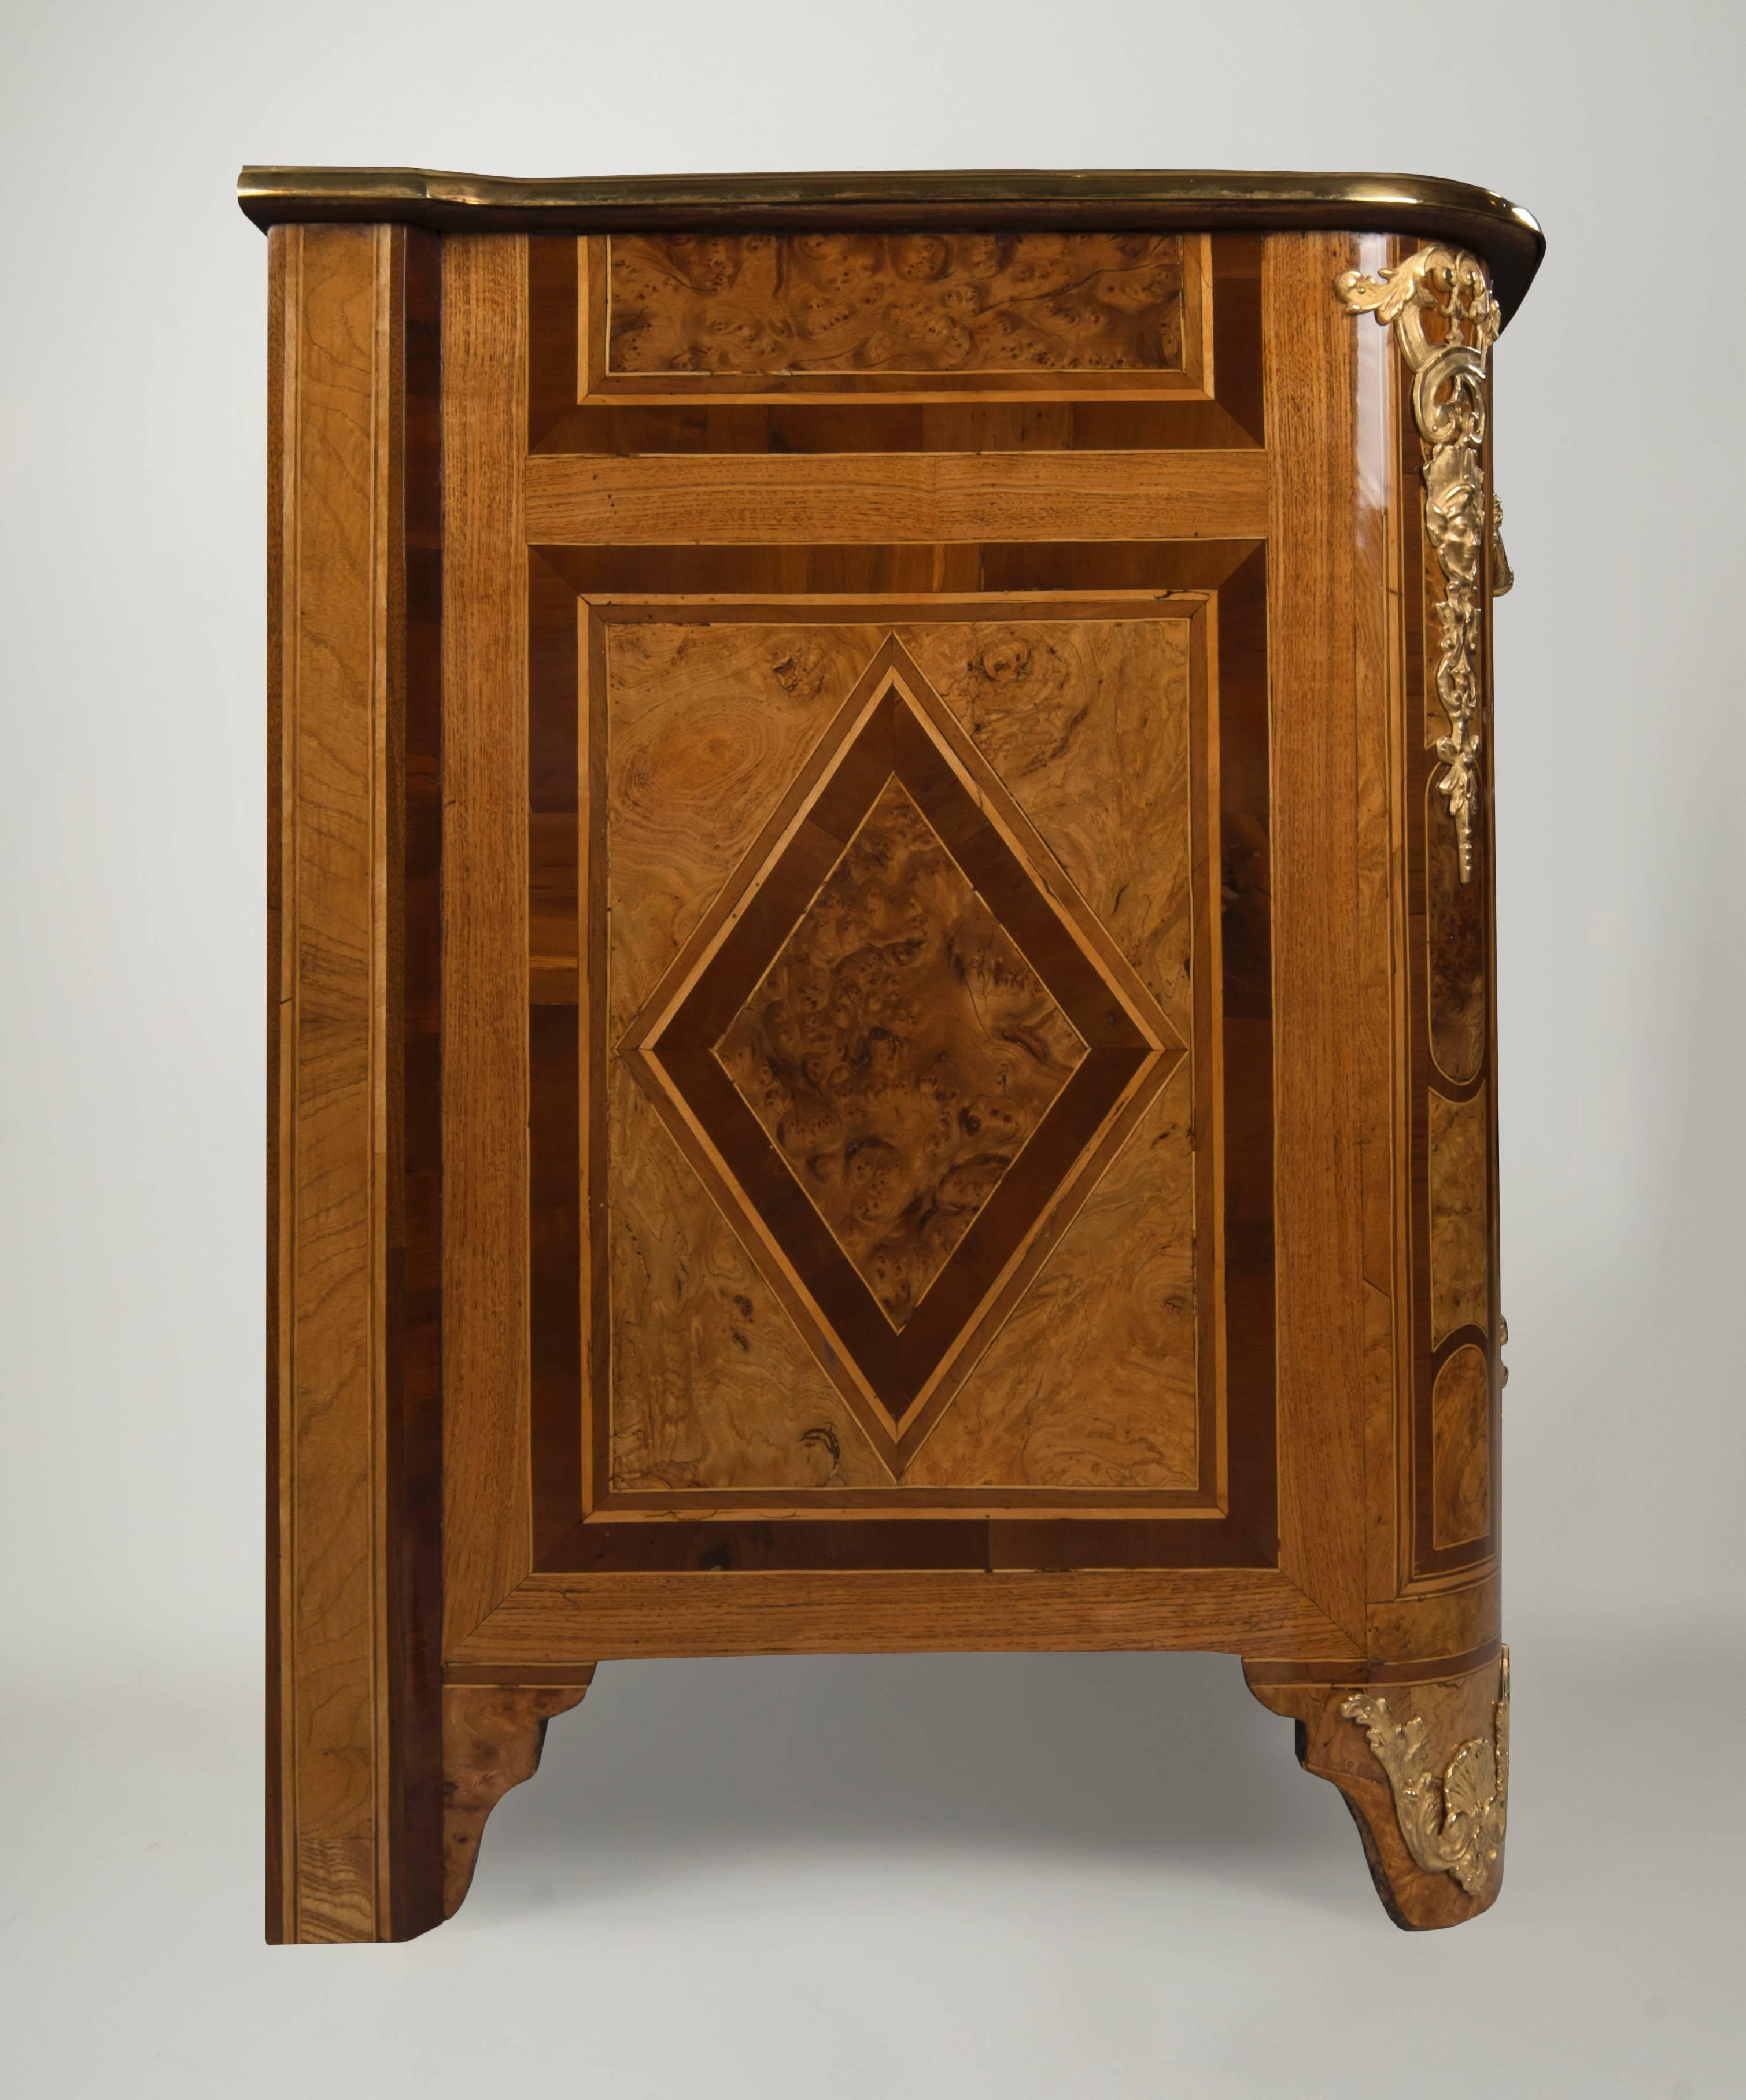 18th Century Regency Commode Attributed to Thomas Hache